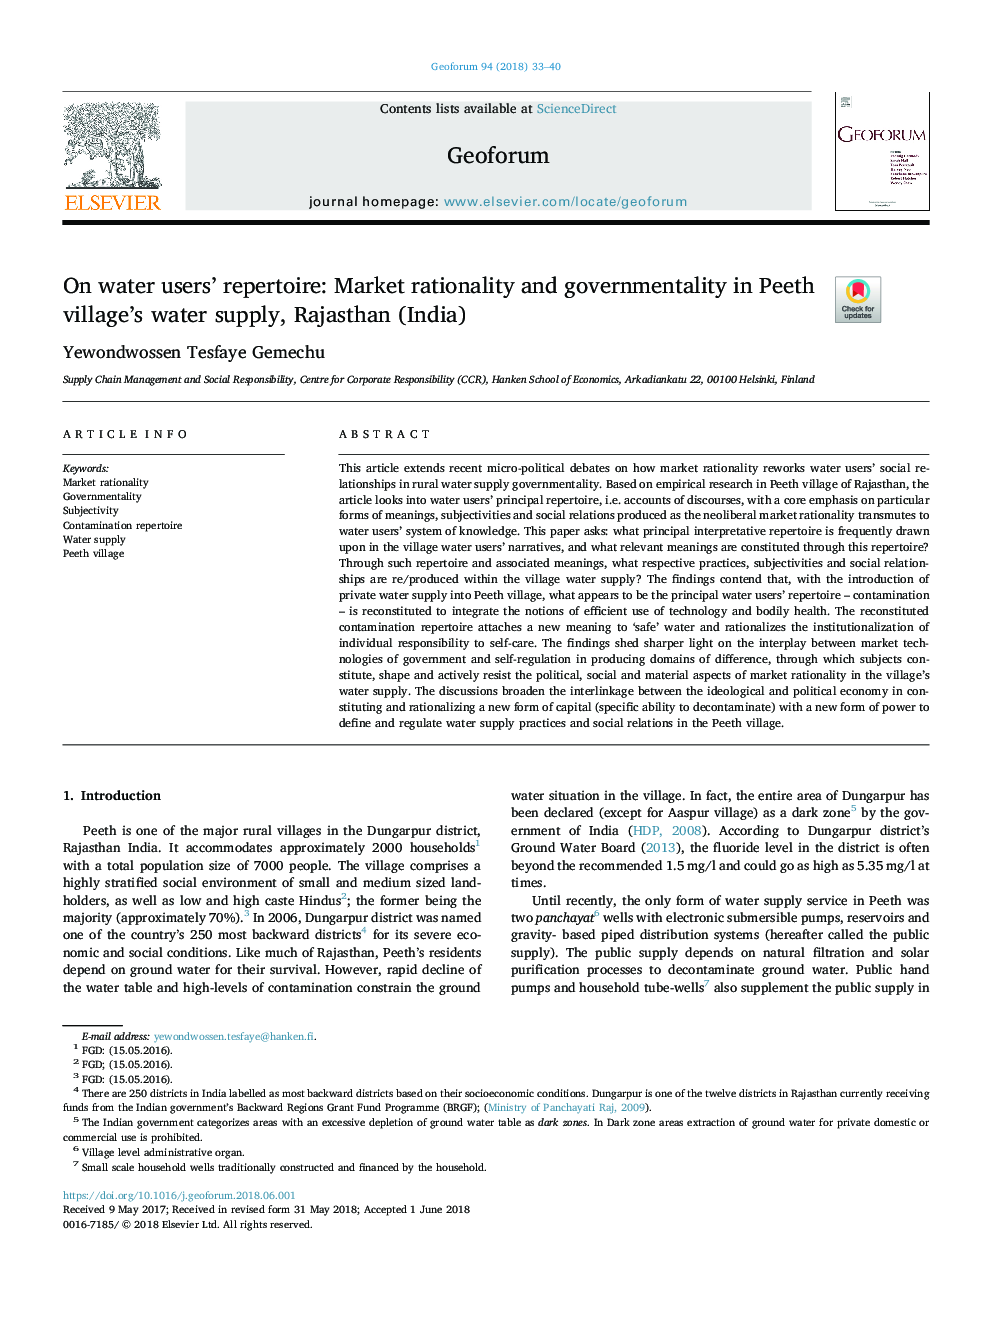 On water users' repertoire: Market rationality and governmentality in Peeth village's water supply, Rajasthan (India)